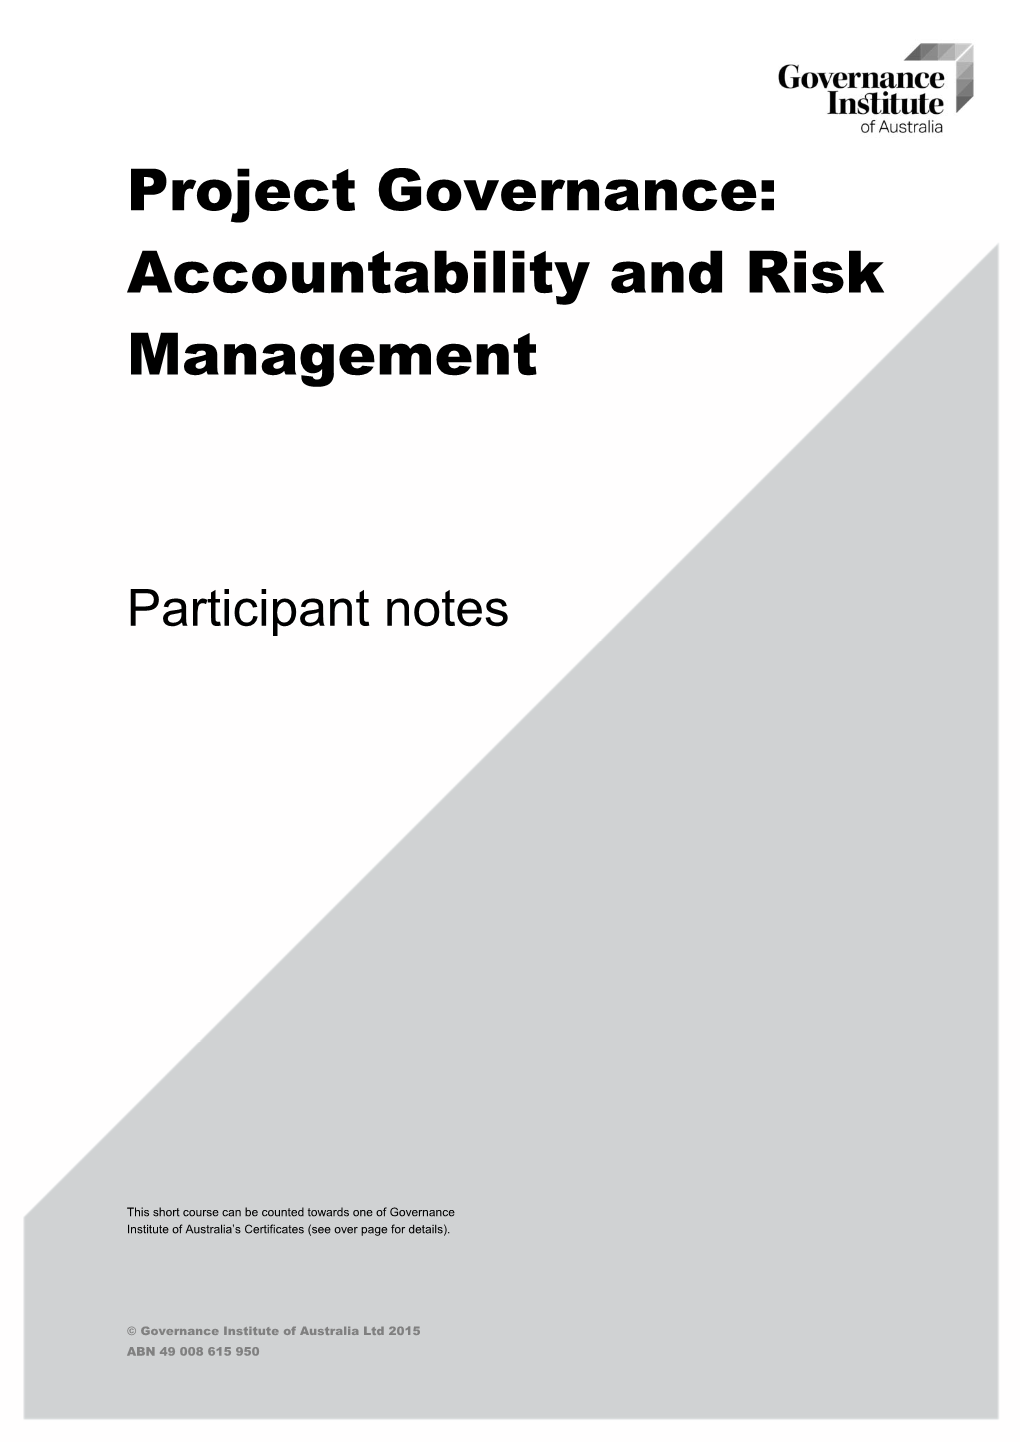 Project Governance: Accountability and Risk Management